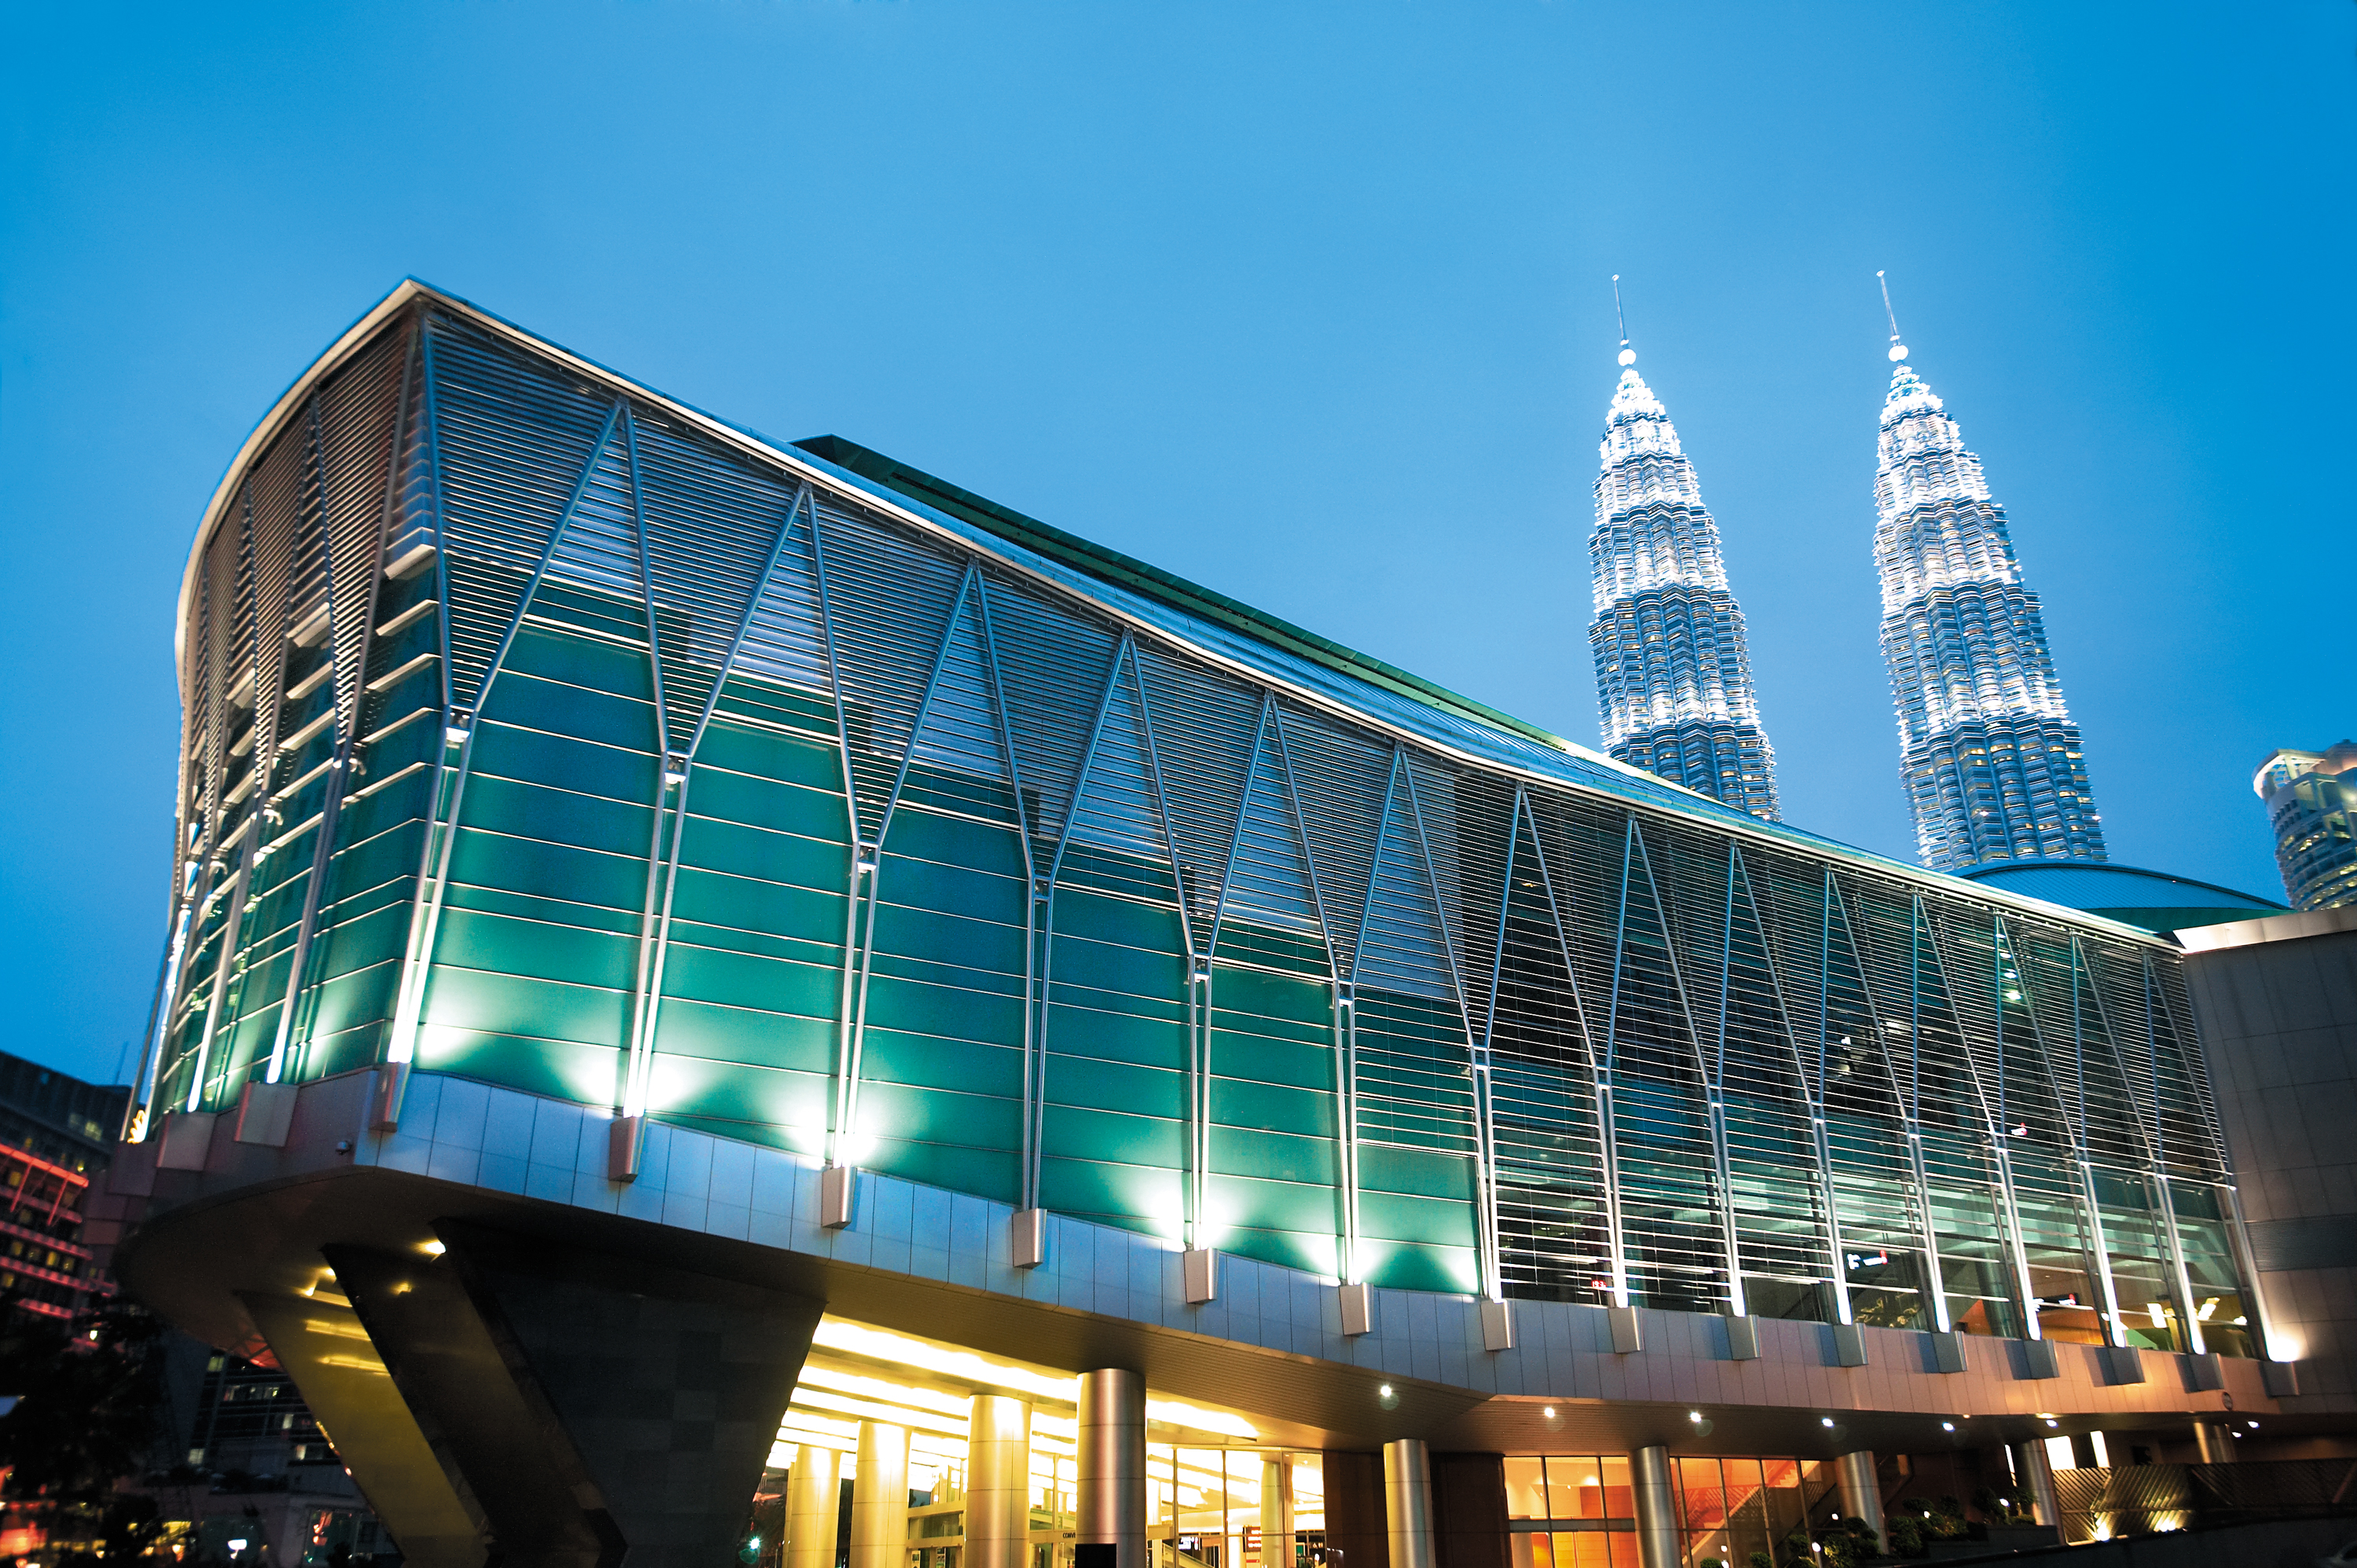 Kuala Lumpur Convention Center (KLCC) exterior side view at night